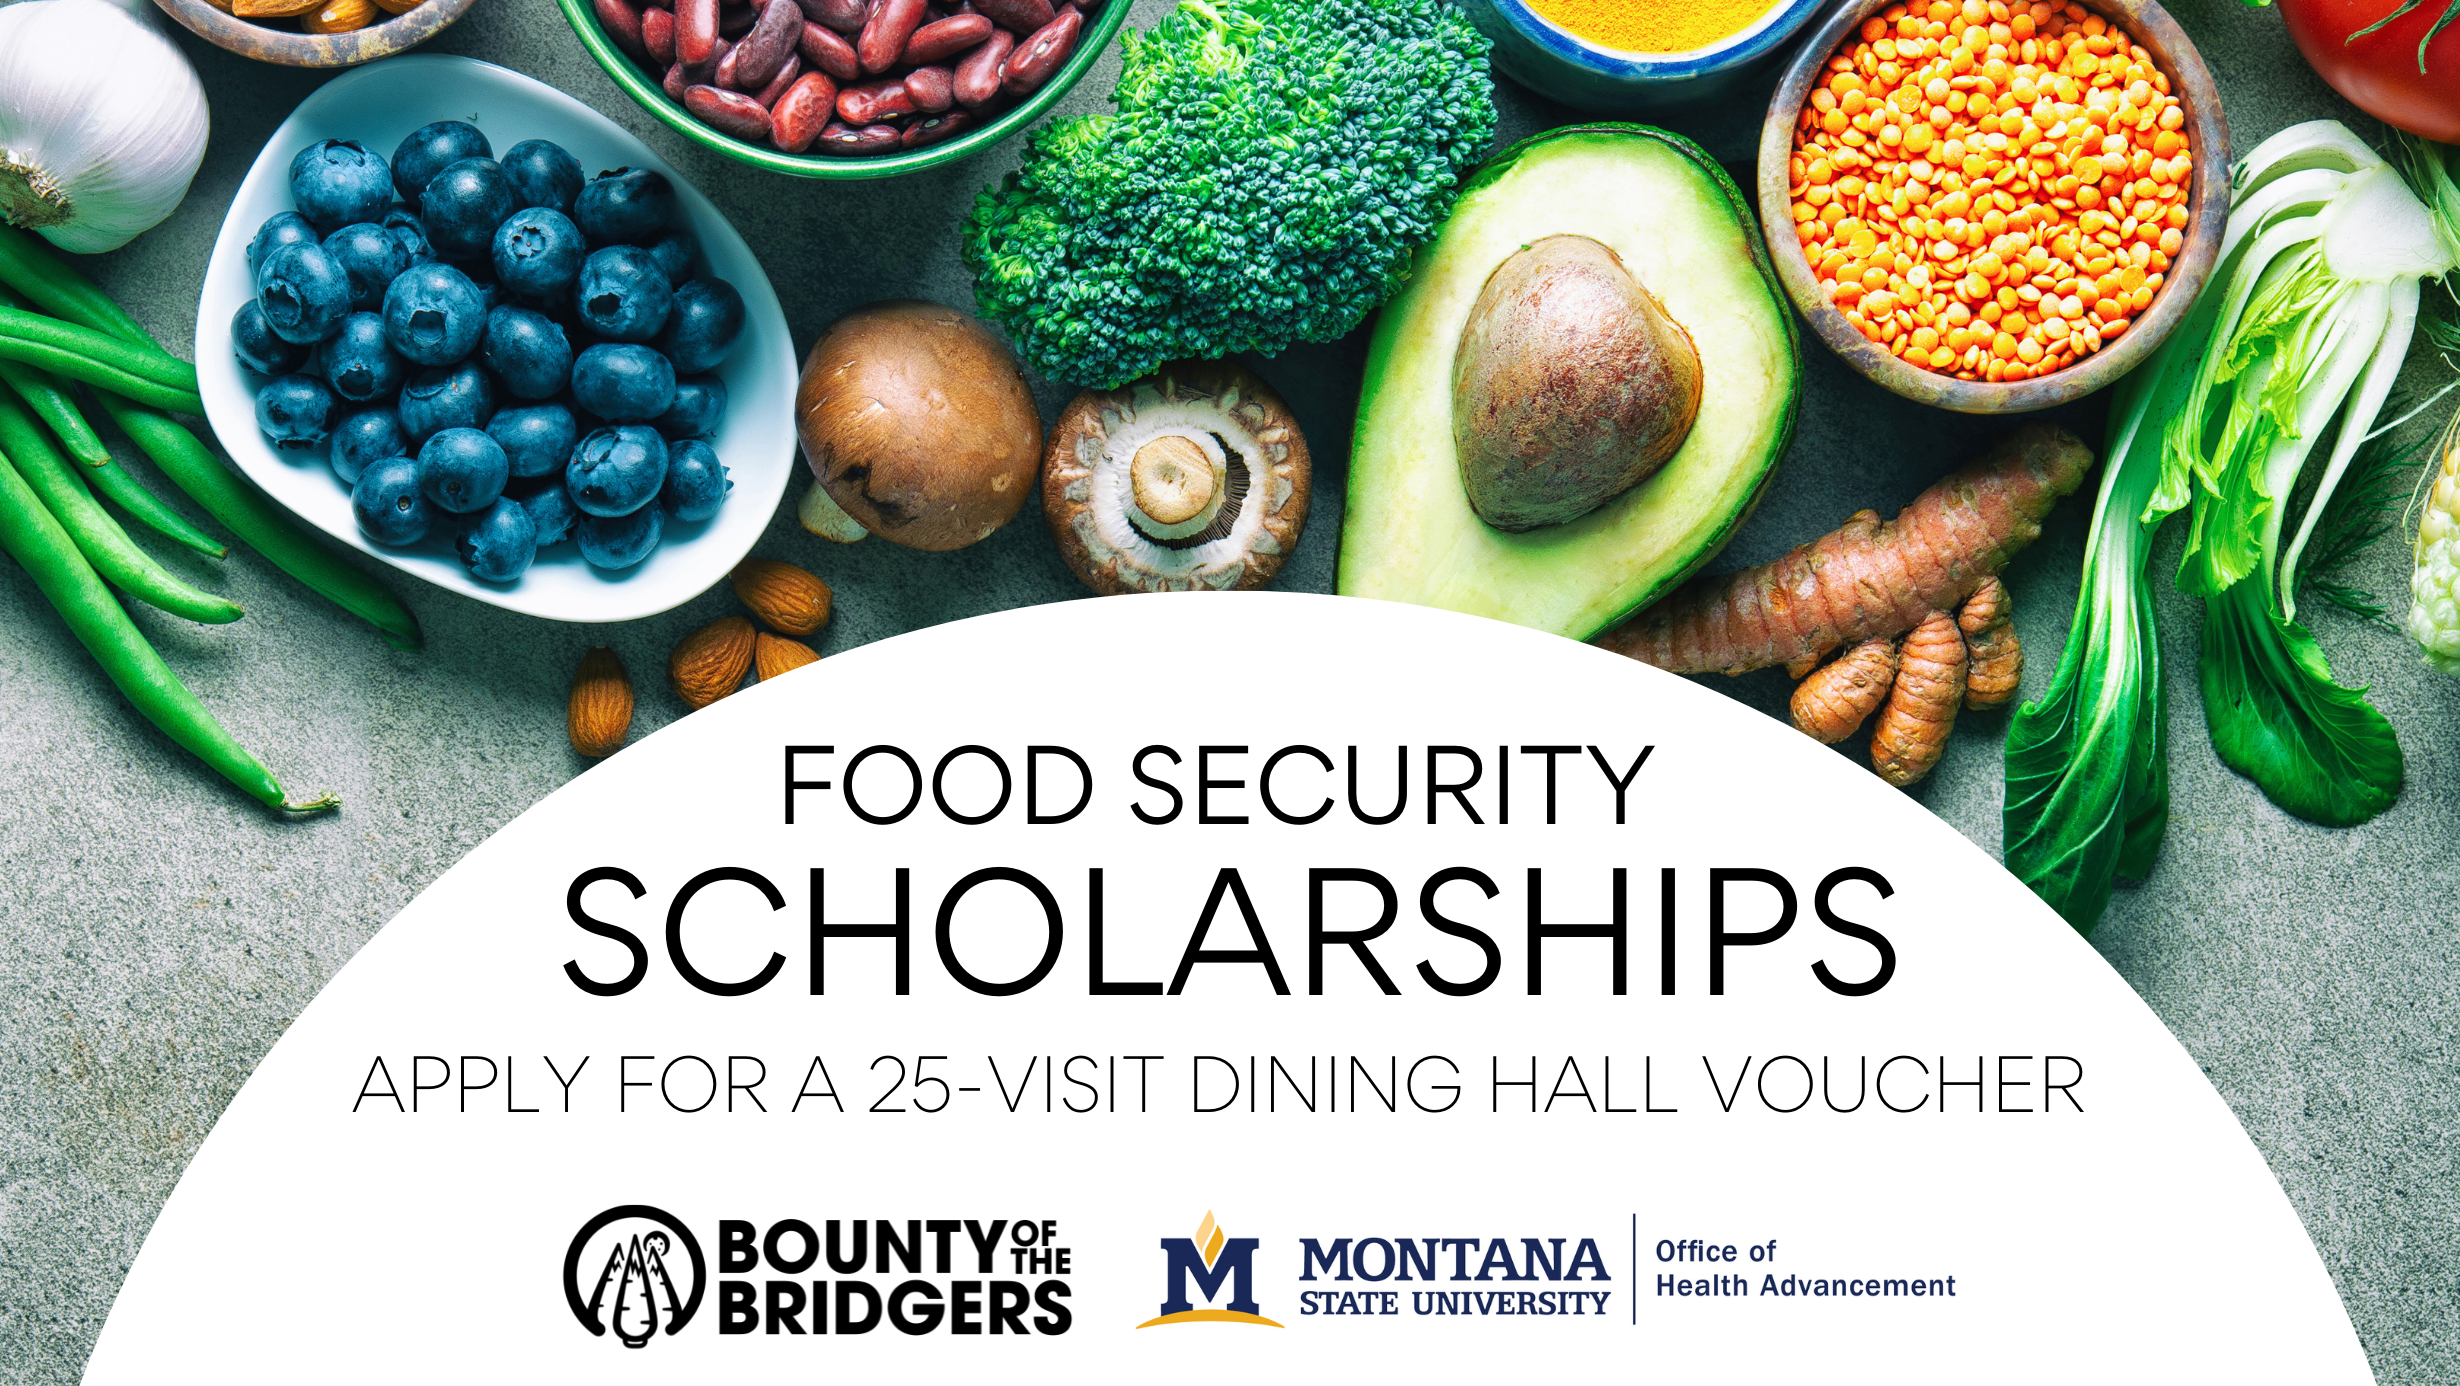 Food Security Scholarships - Apply for a 25-visit dining hall voucher